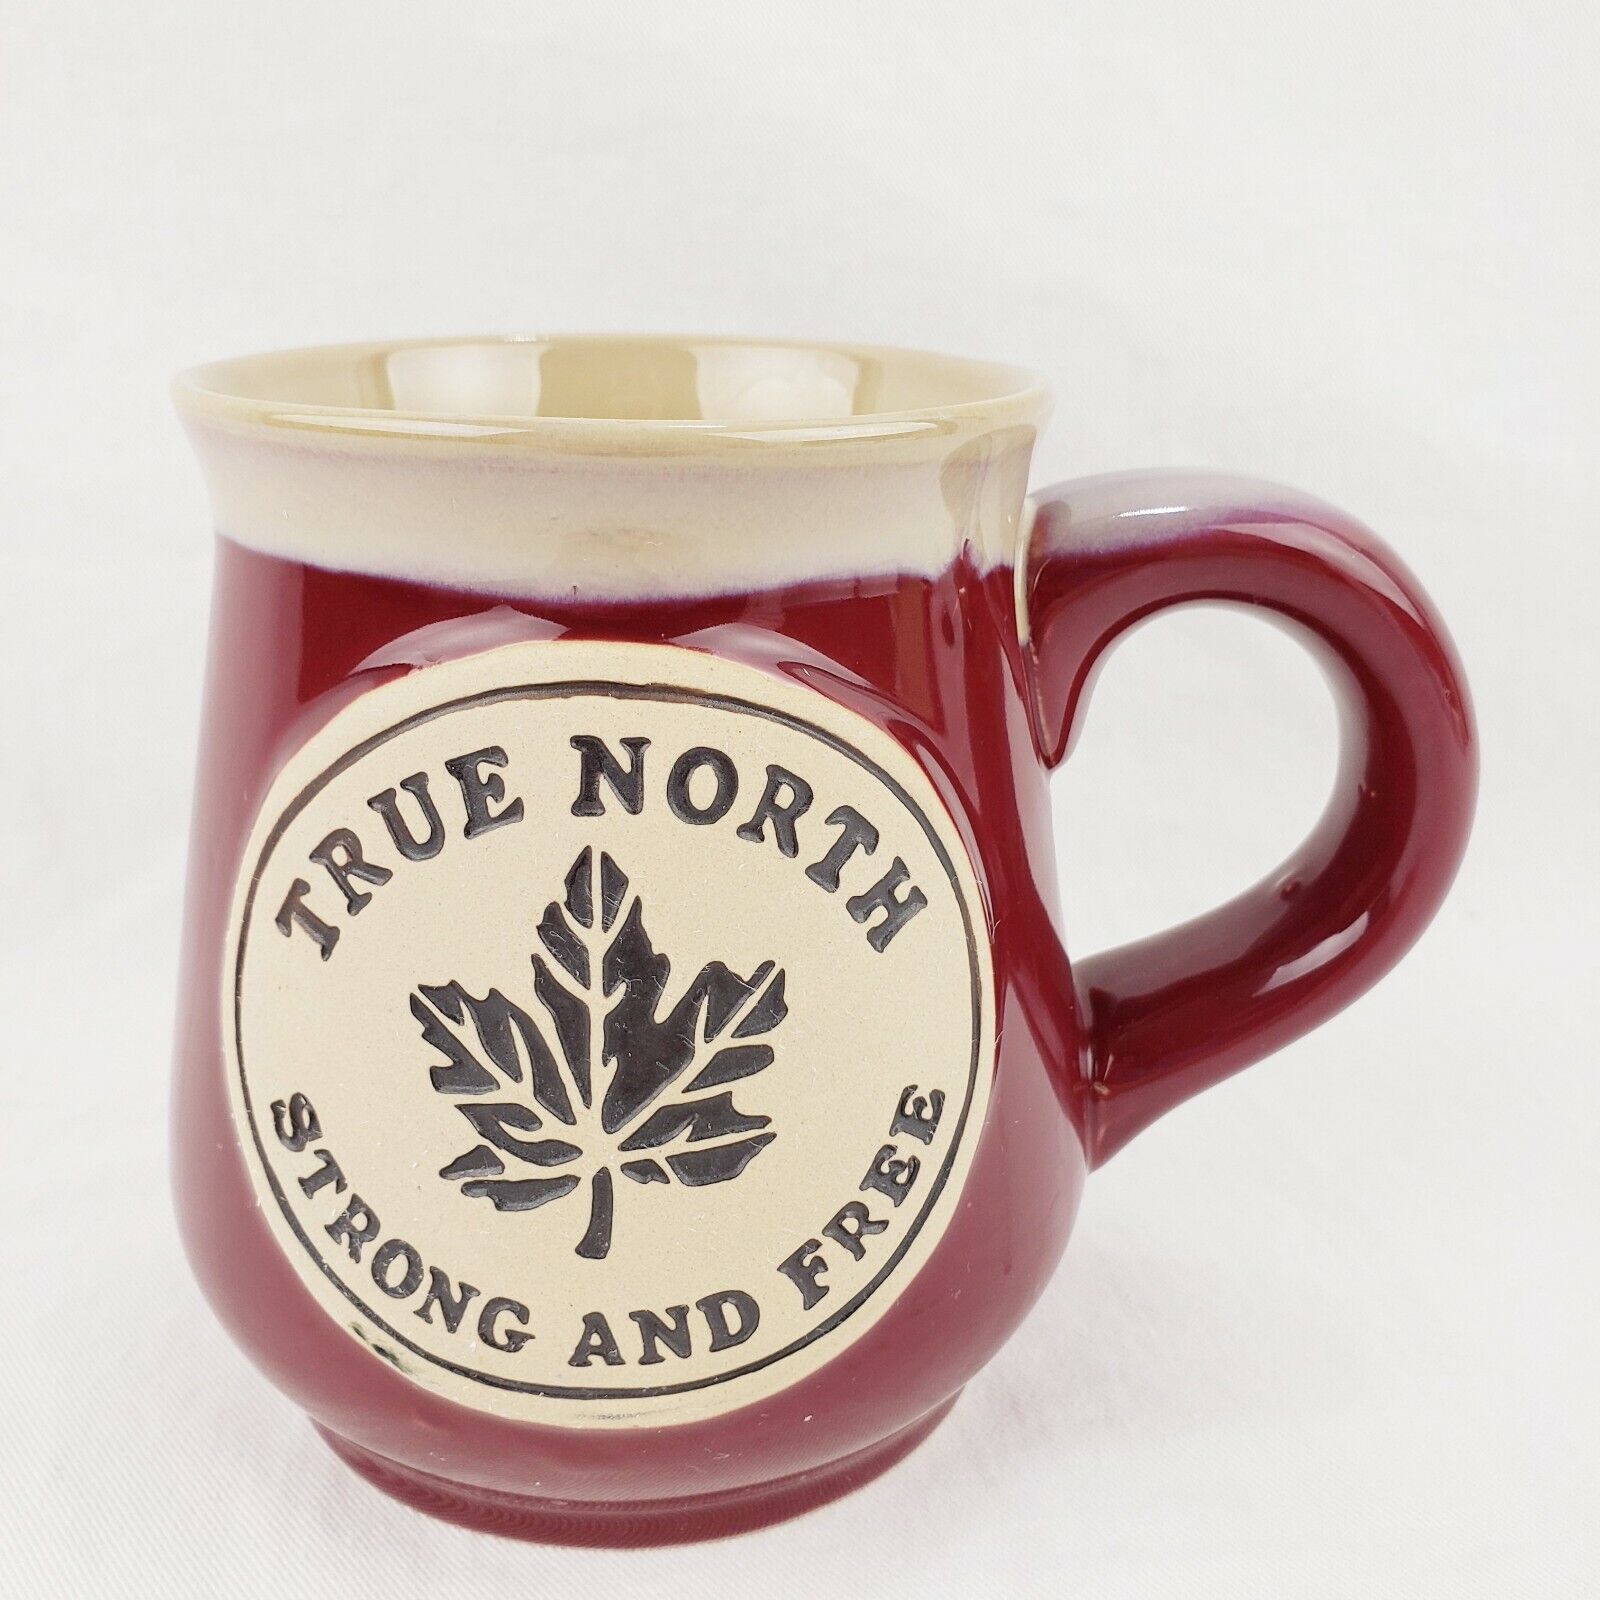 Pottery Mug True North Strong and Free Canadian Red Glazed 14 fl oz 